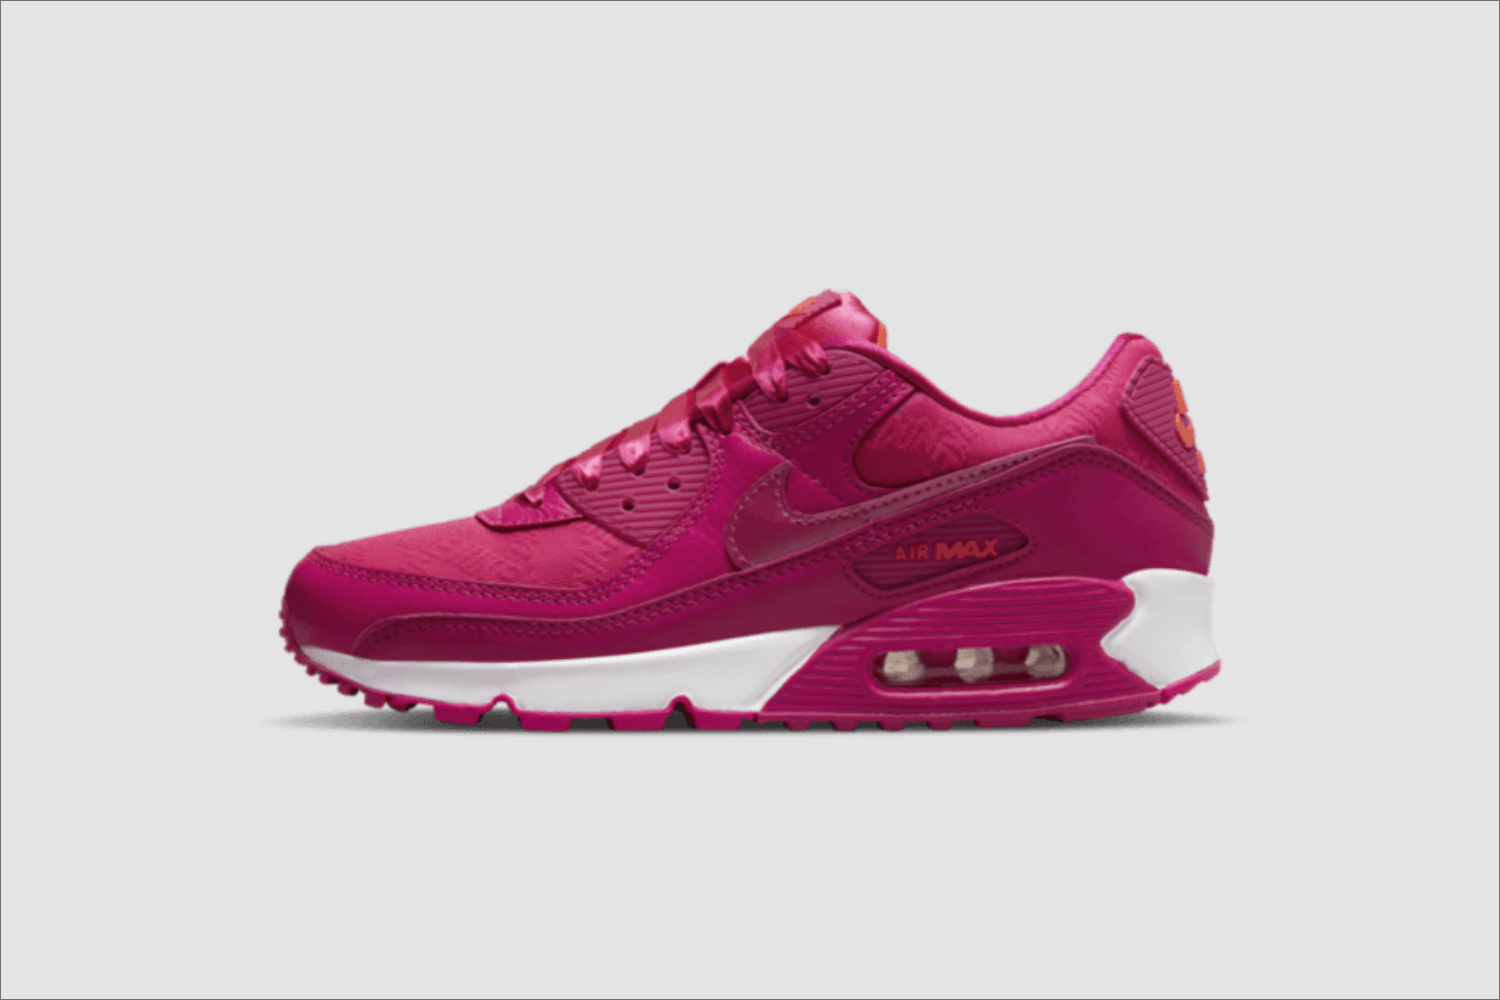 Get ready for Valentine's Day with this Nike Air Max 90